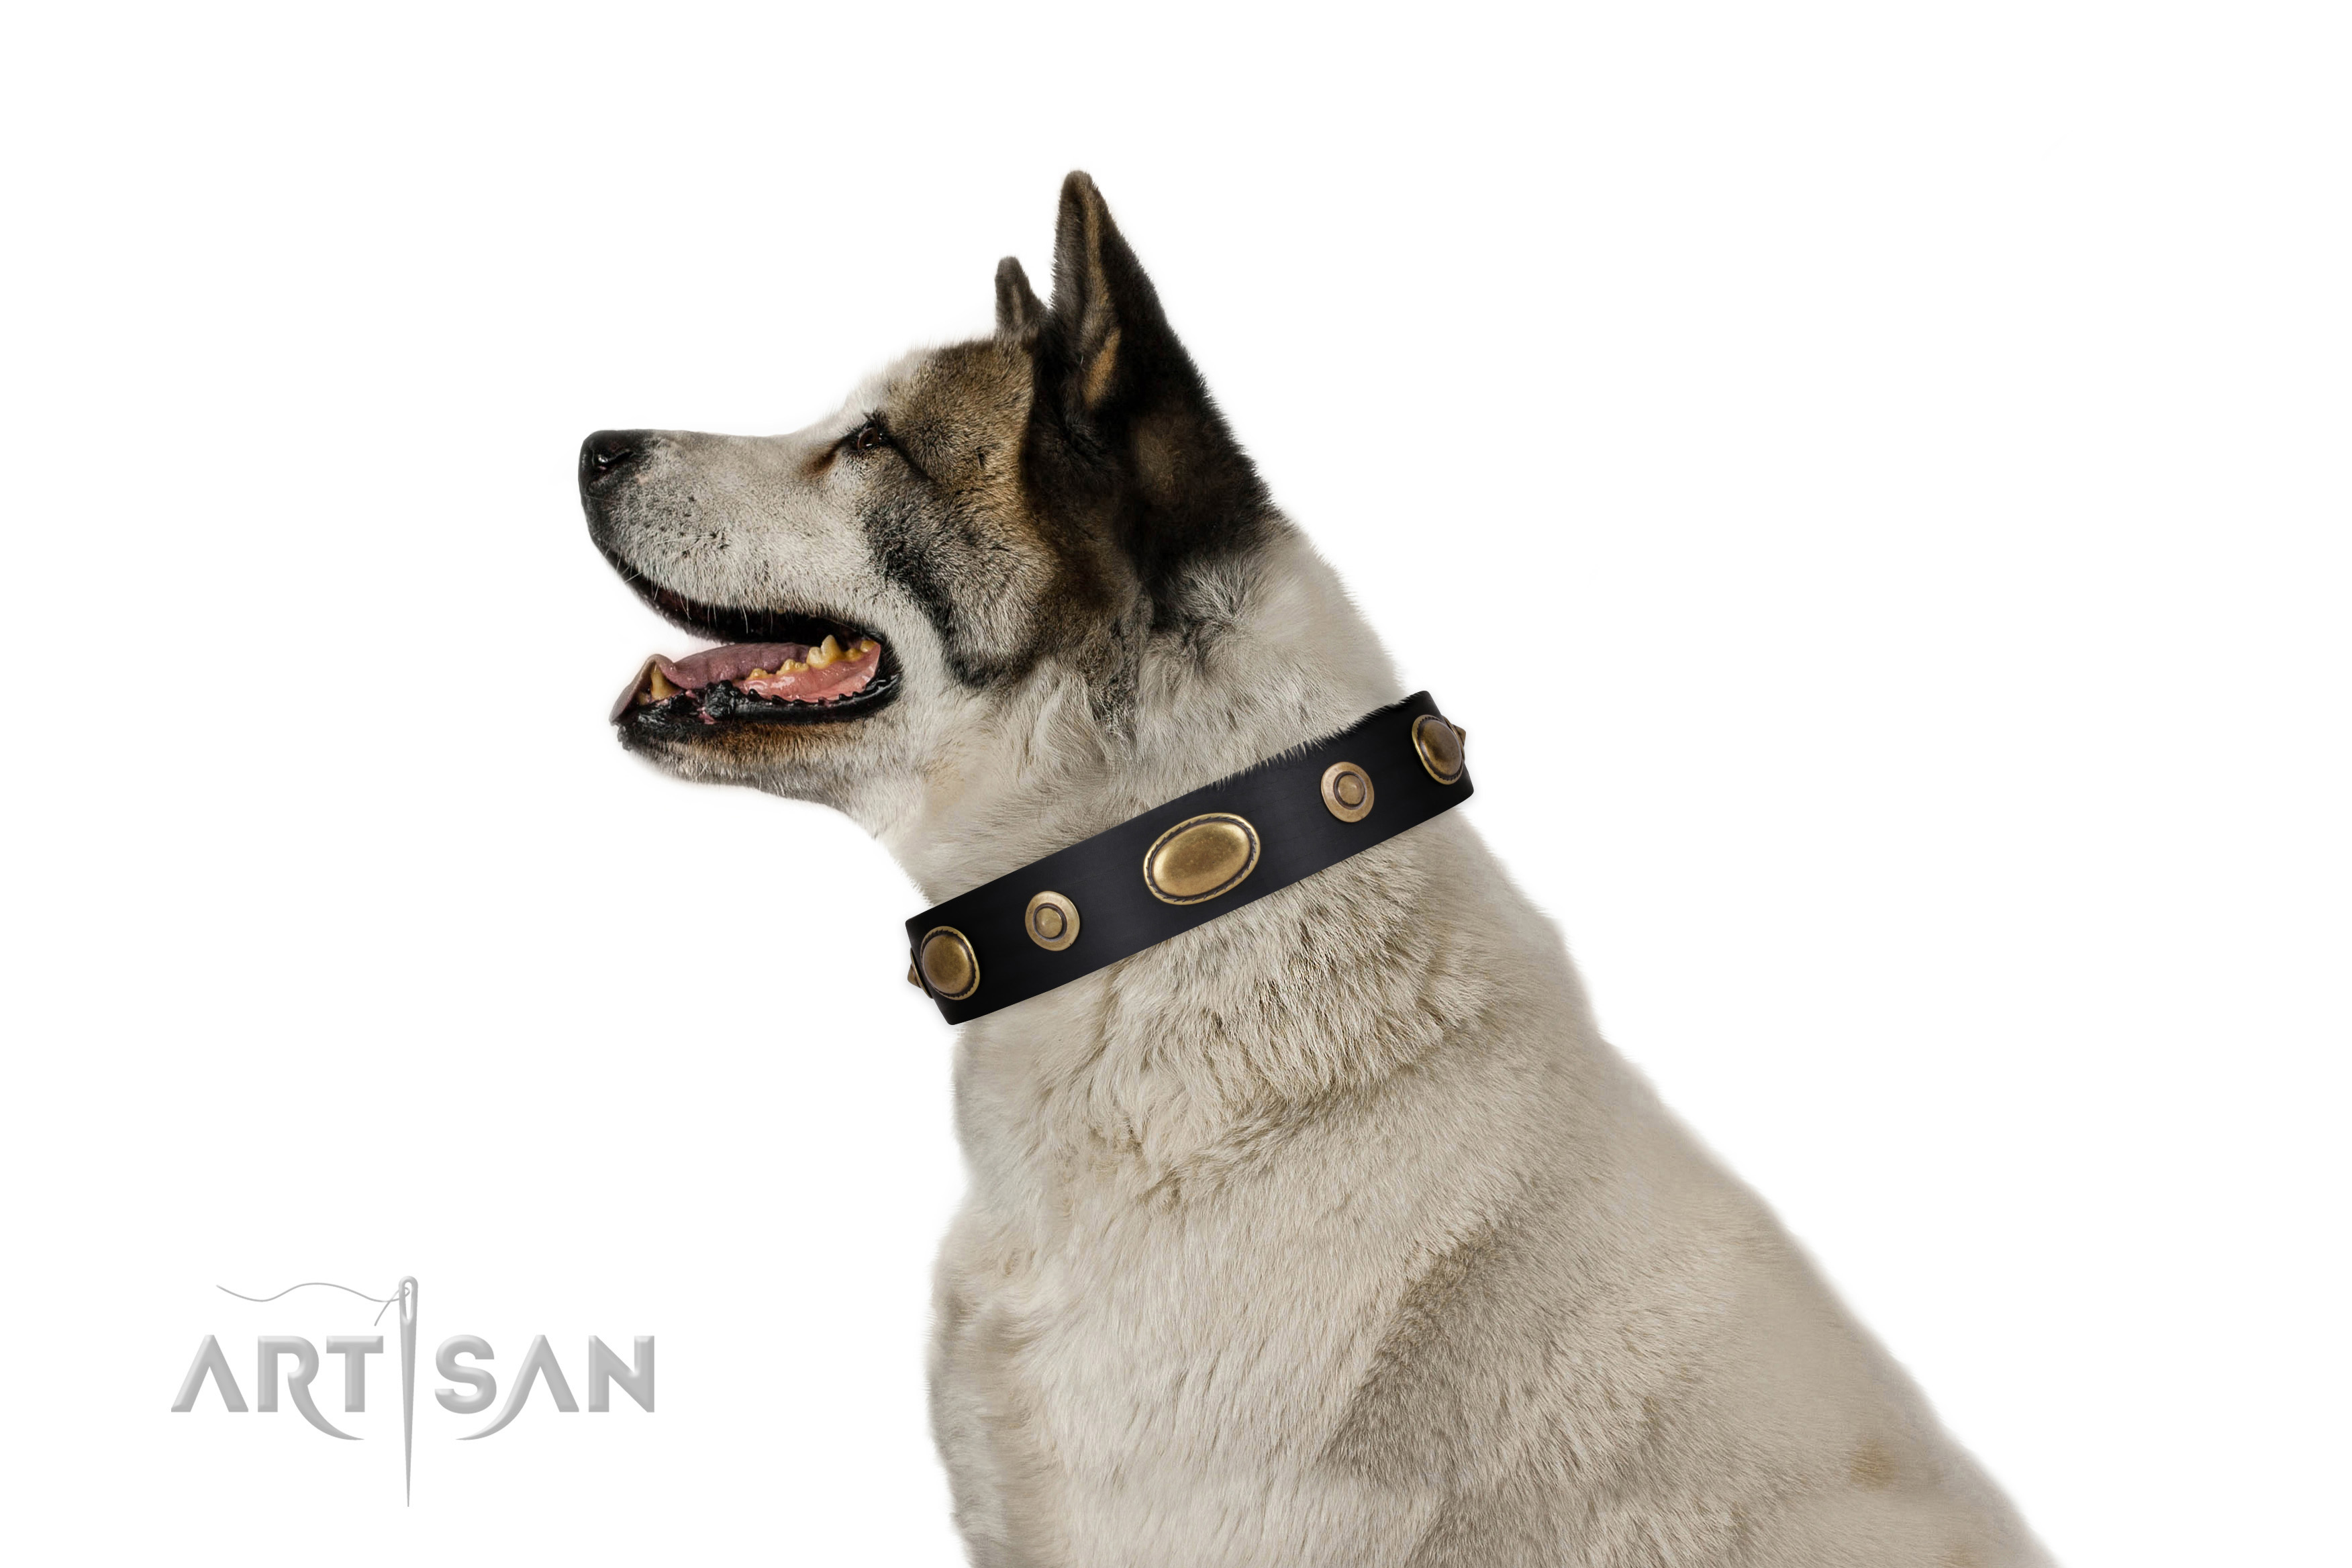 Comfy wearing dog collar of natural leather with exquisite adornments